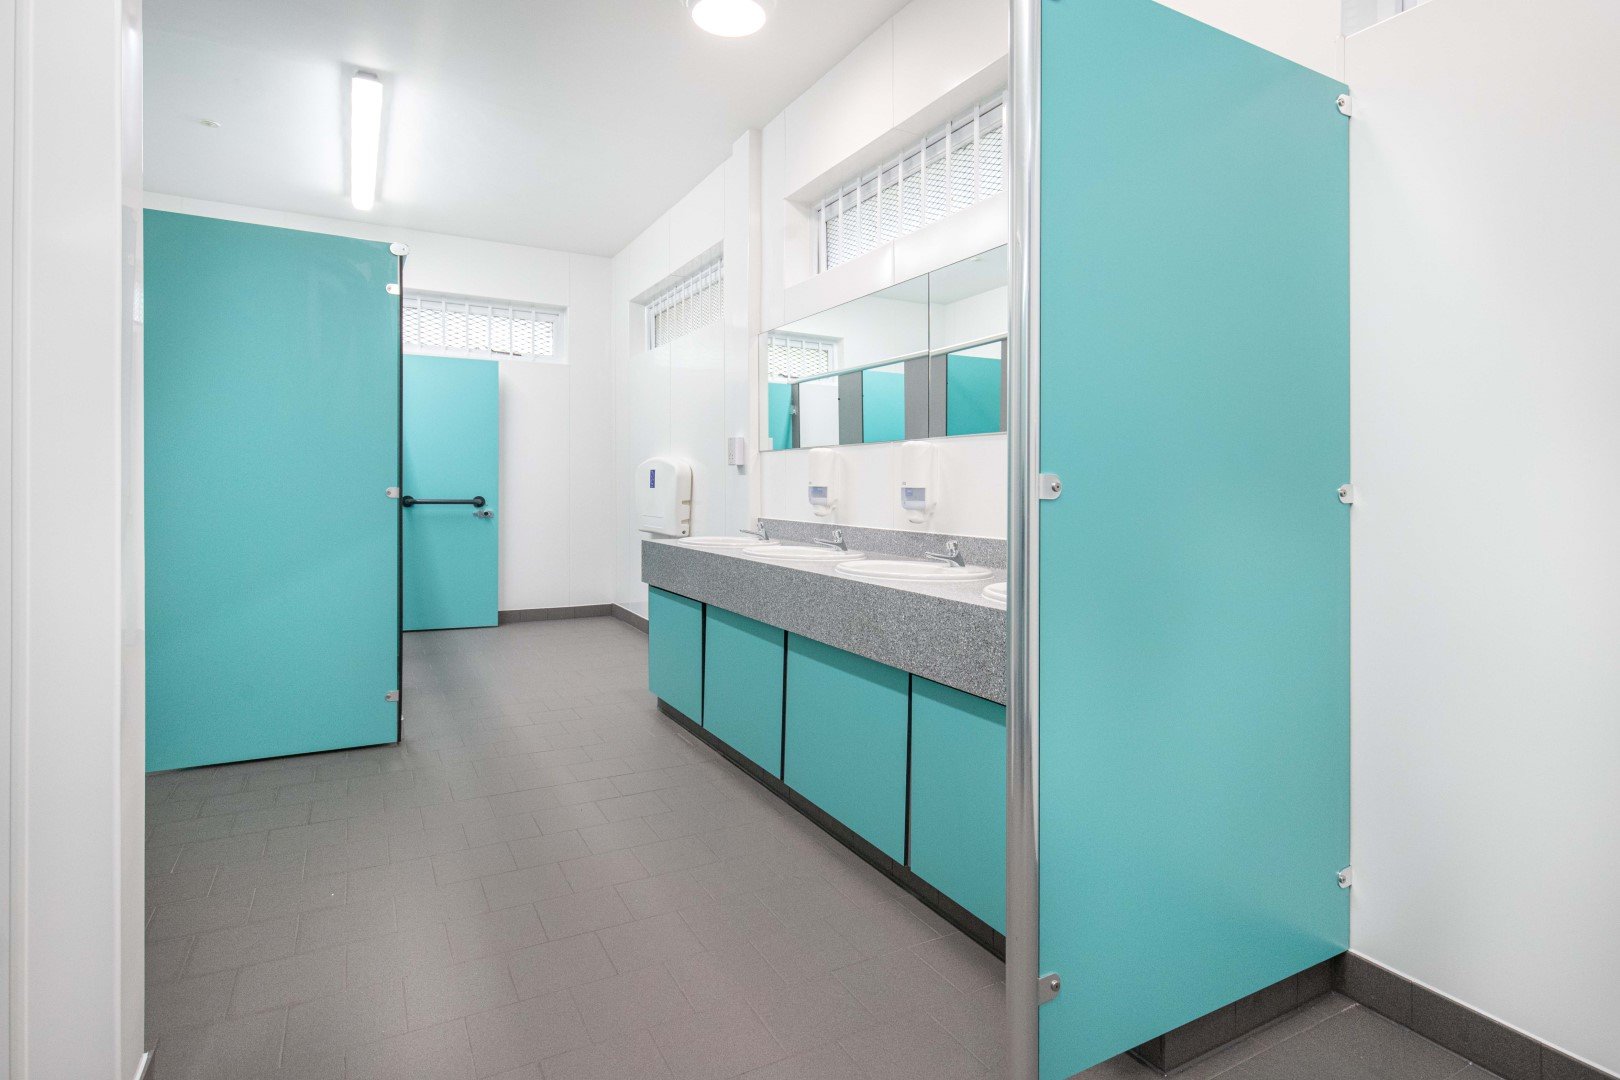 handwash area with blue vanity unit and solid surface top in washroom at riverside campsite.jpg